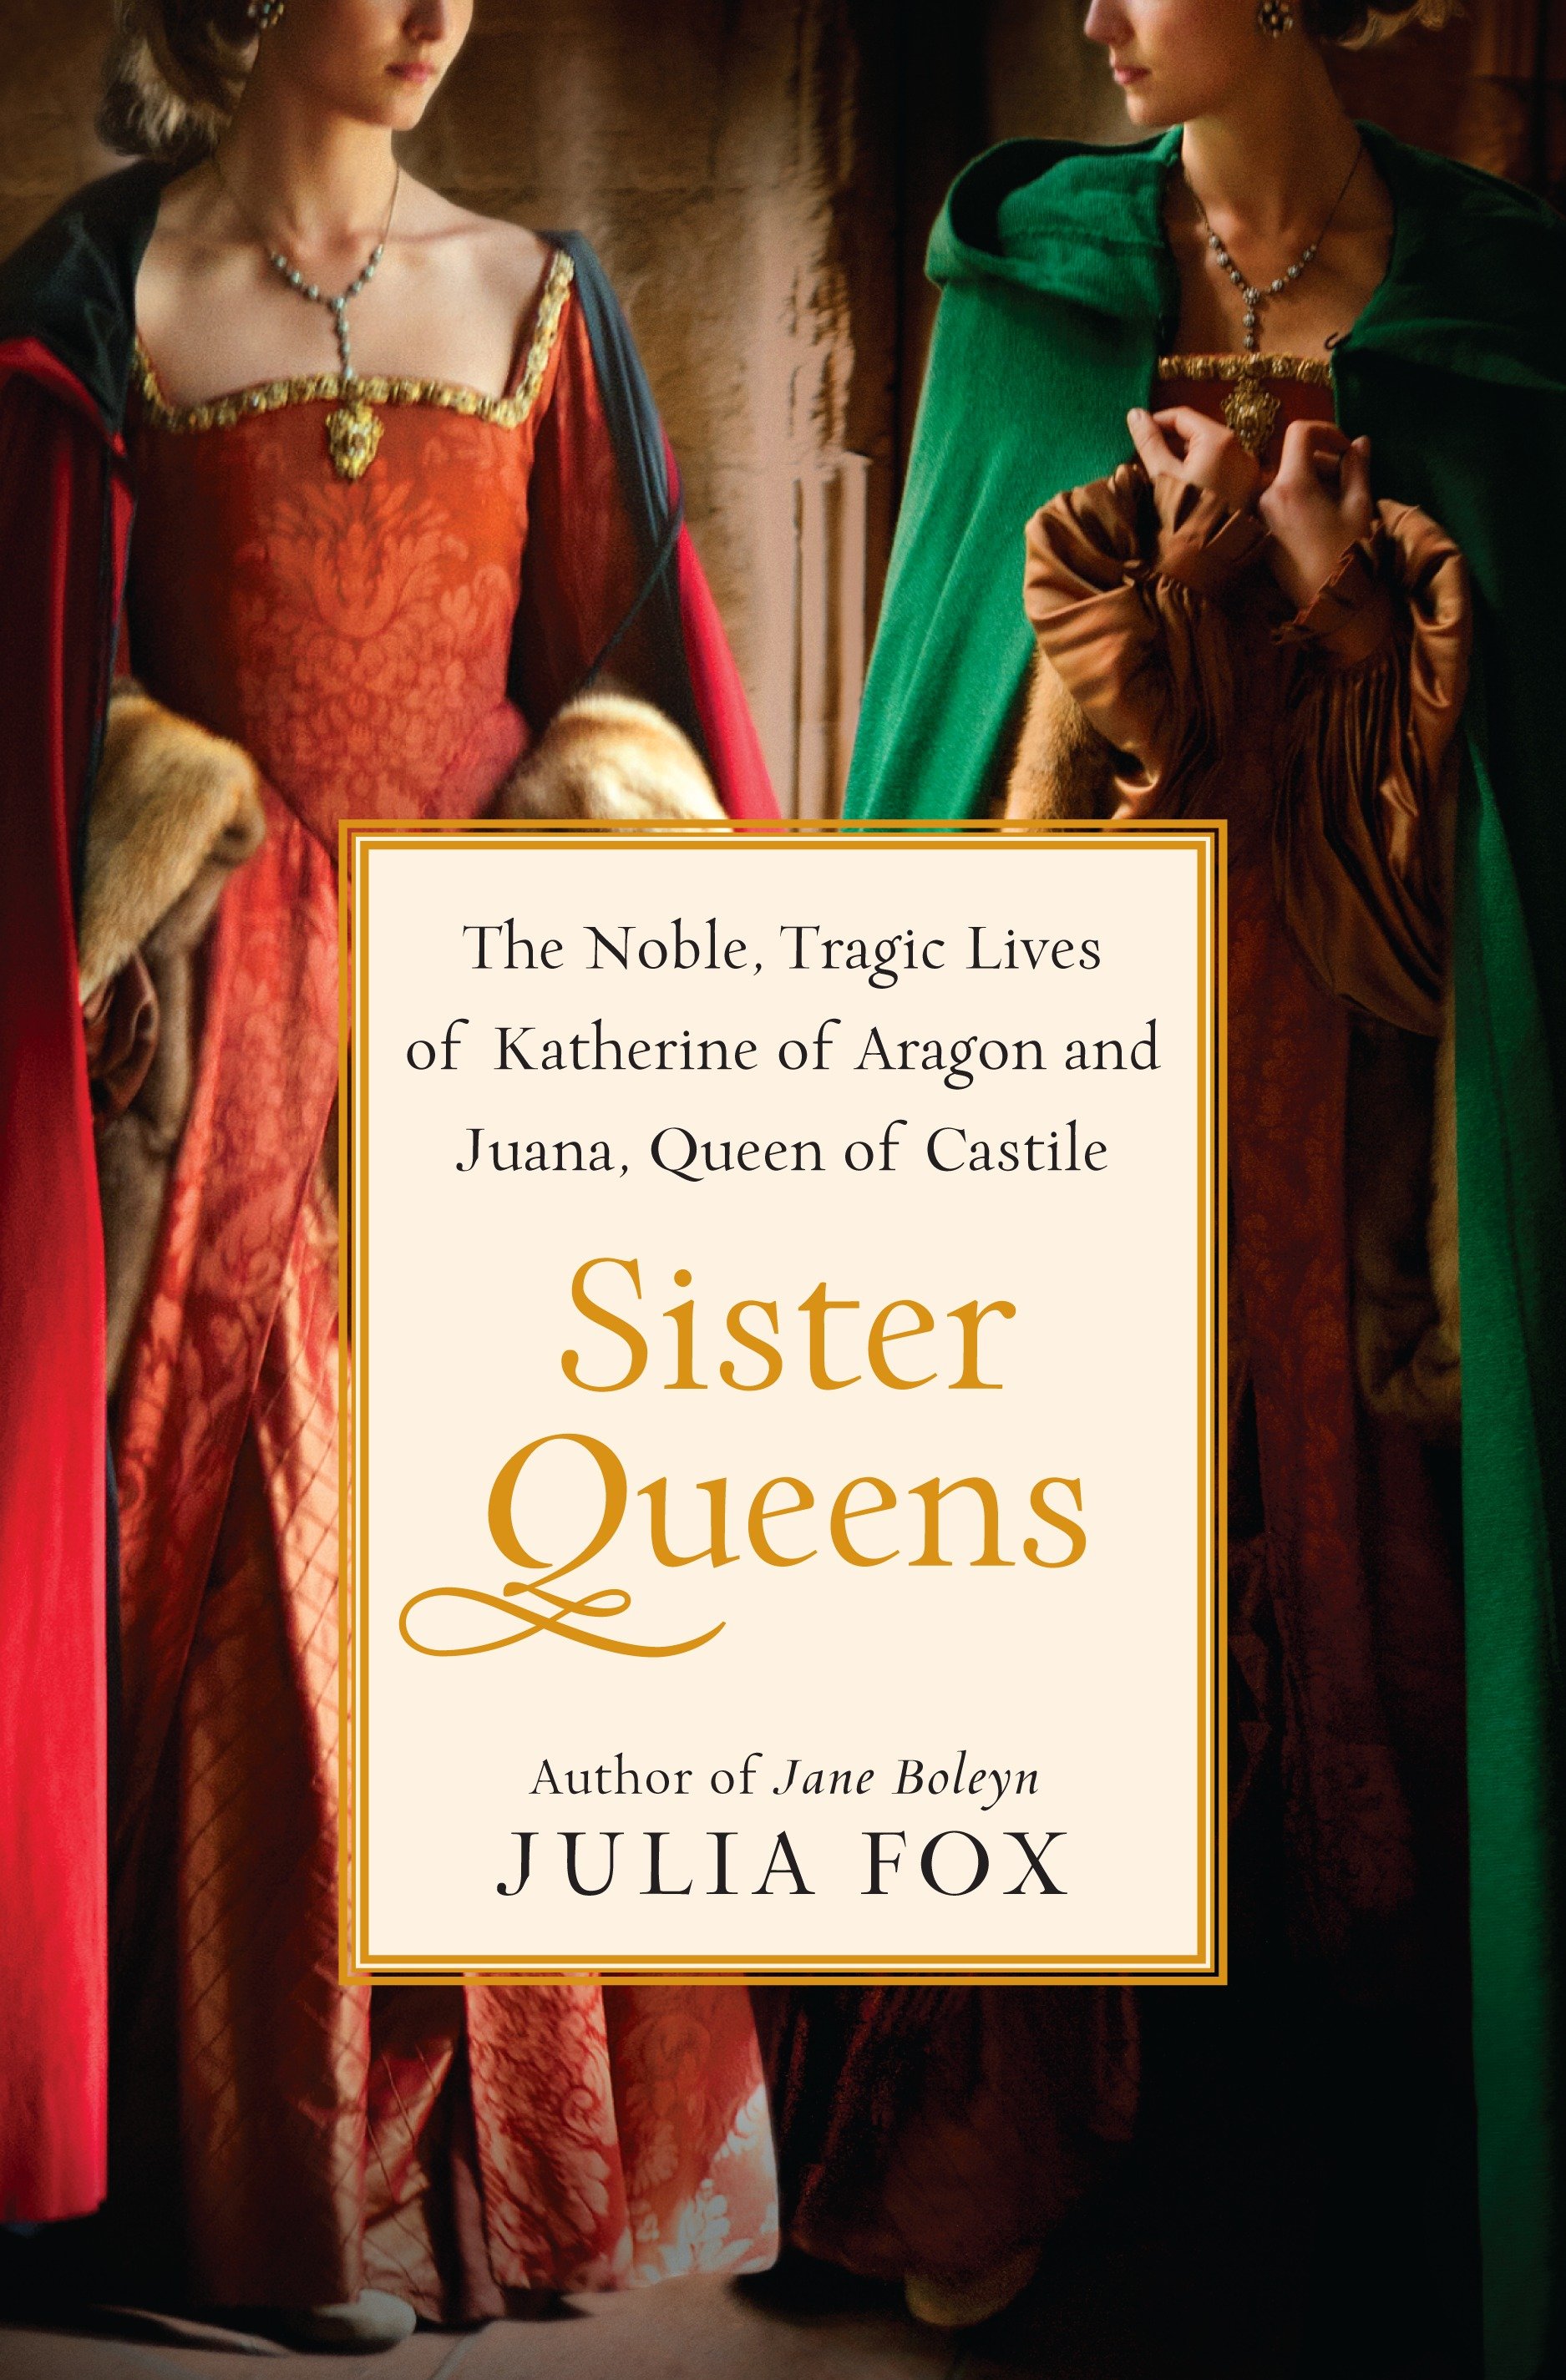 Sister queens the noble, tragic lives of Katherine of Aragon and Juana, Queen of Castile cover image